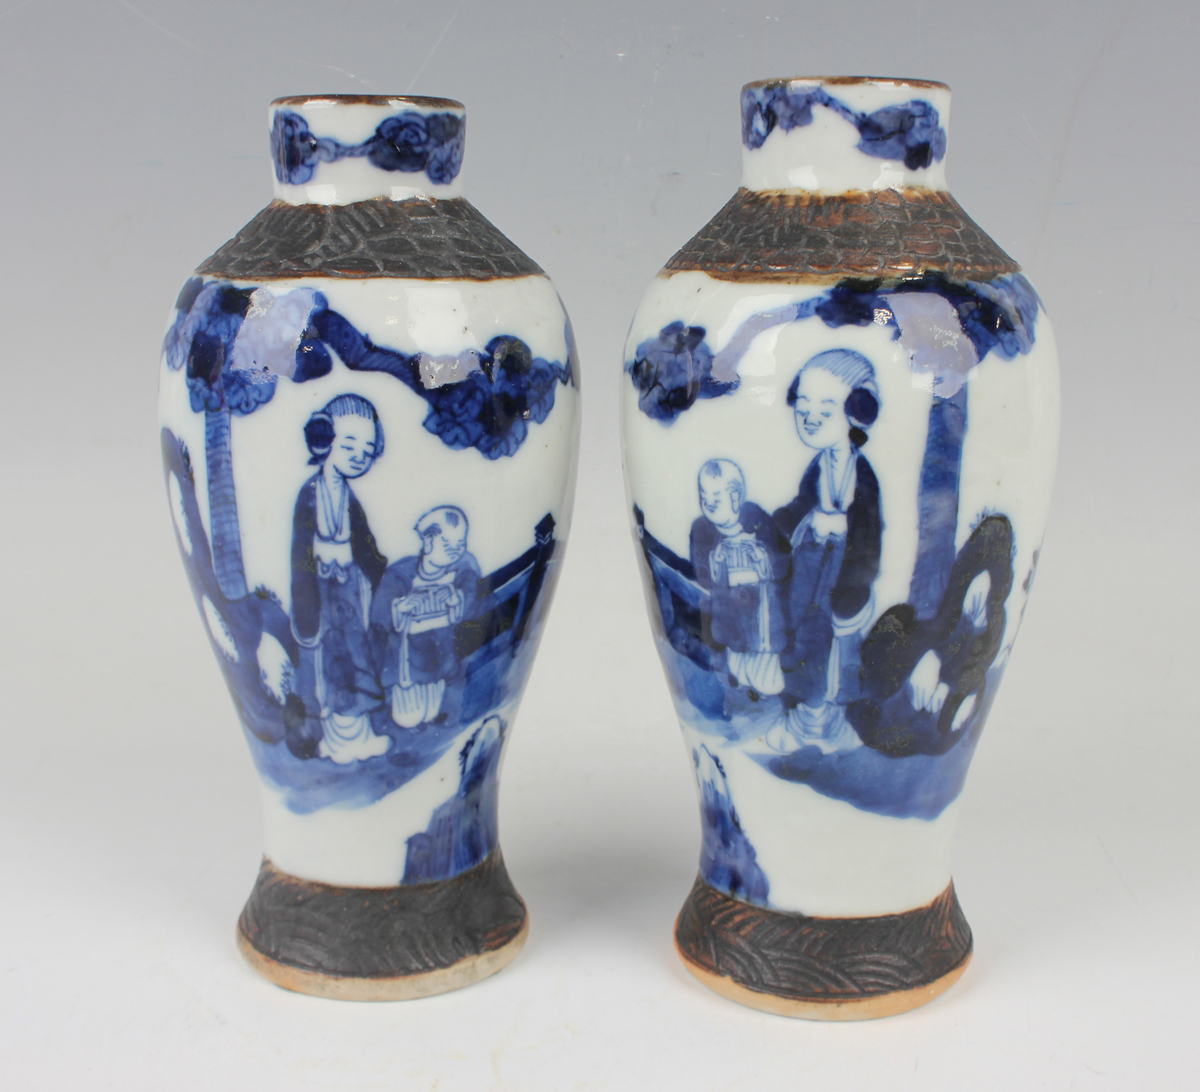 A pair of Chinese blue and white porcelain vases, late 19th/early 20th century, each baluster body